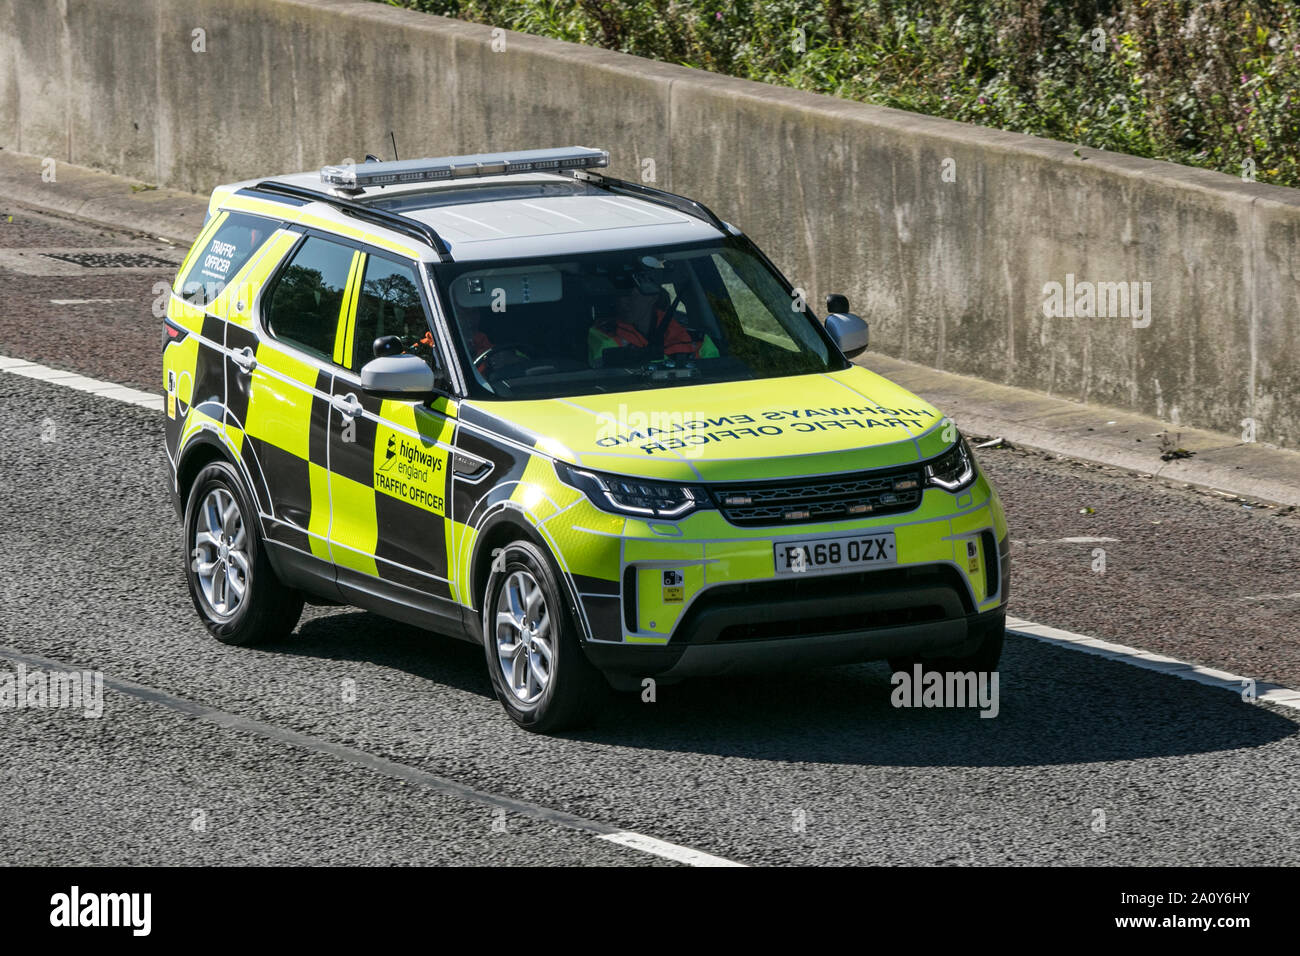 A Highways Agency range rover travelling northbound on the M6 motorway near Garstang in Lancashire, UK. Stock Photo